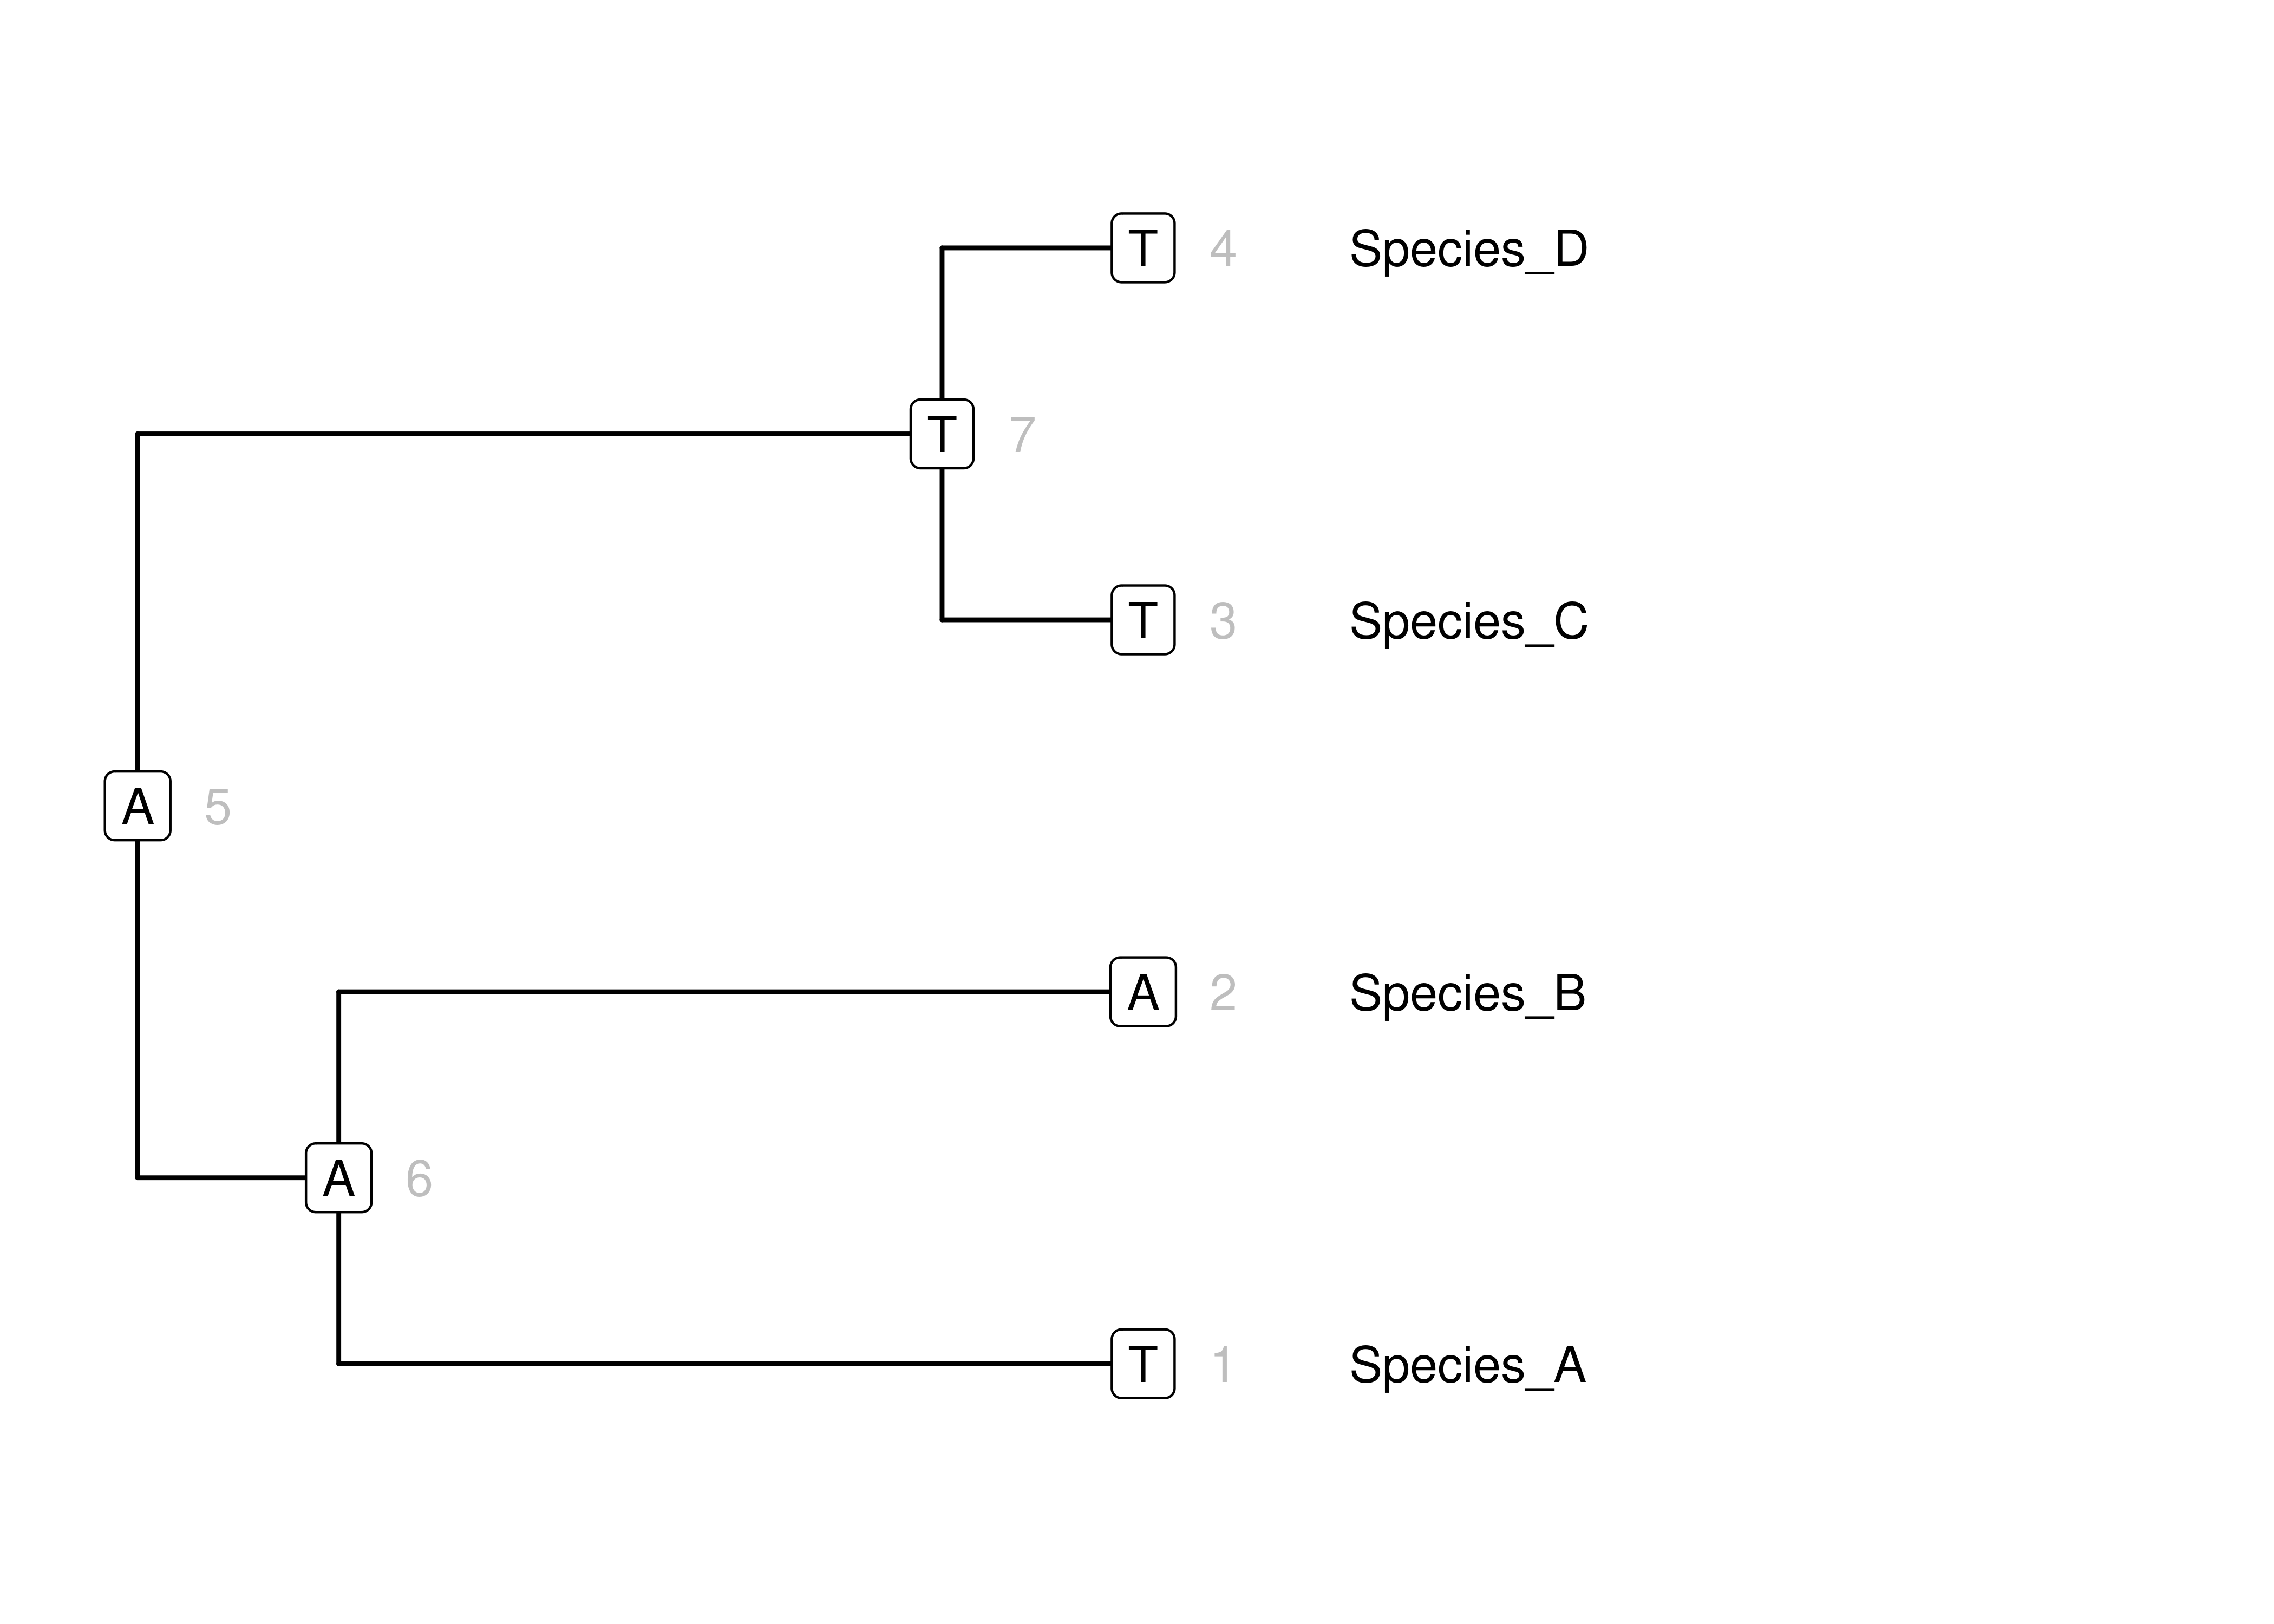 Simulation of states for a single DNA site on a simple tree according to our toy mammal model. Node numbers are in gray. Character states are in boxes at nodes. Branch lengths for this phylogram are in units of expected change.